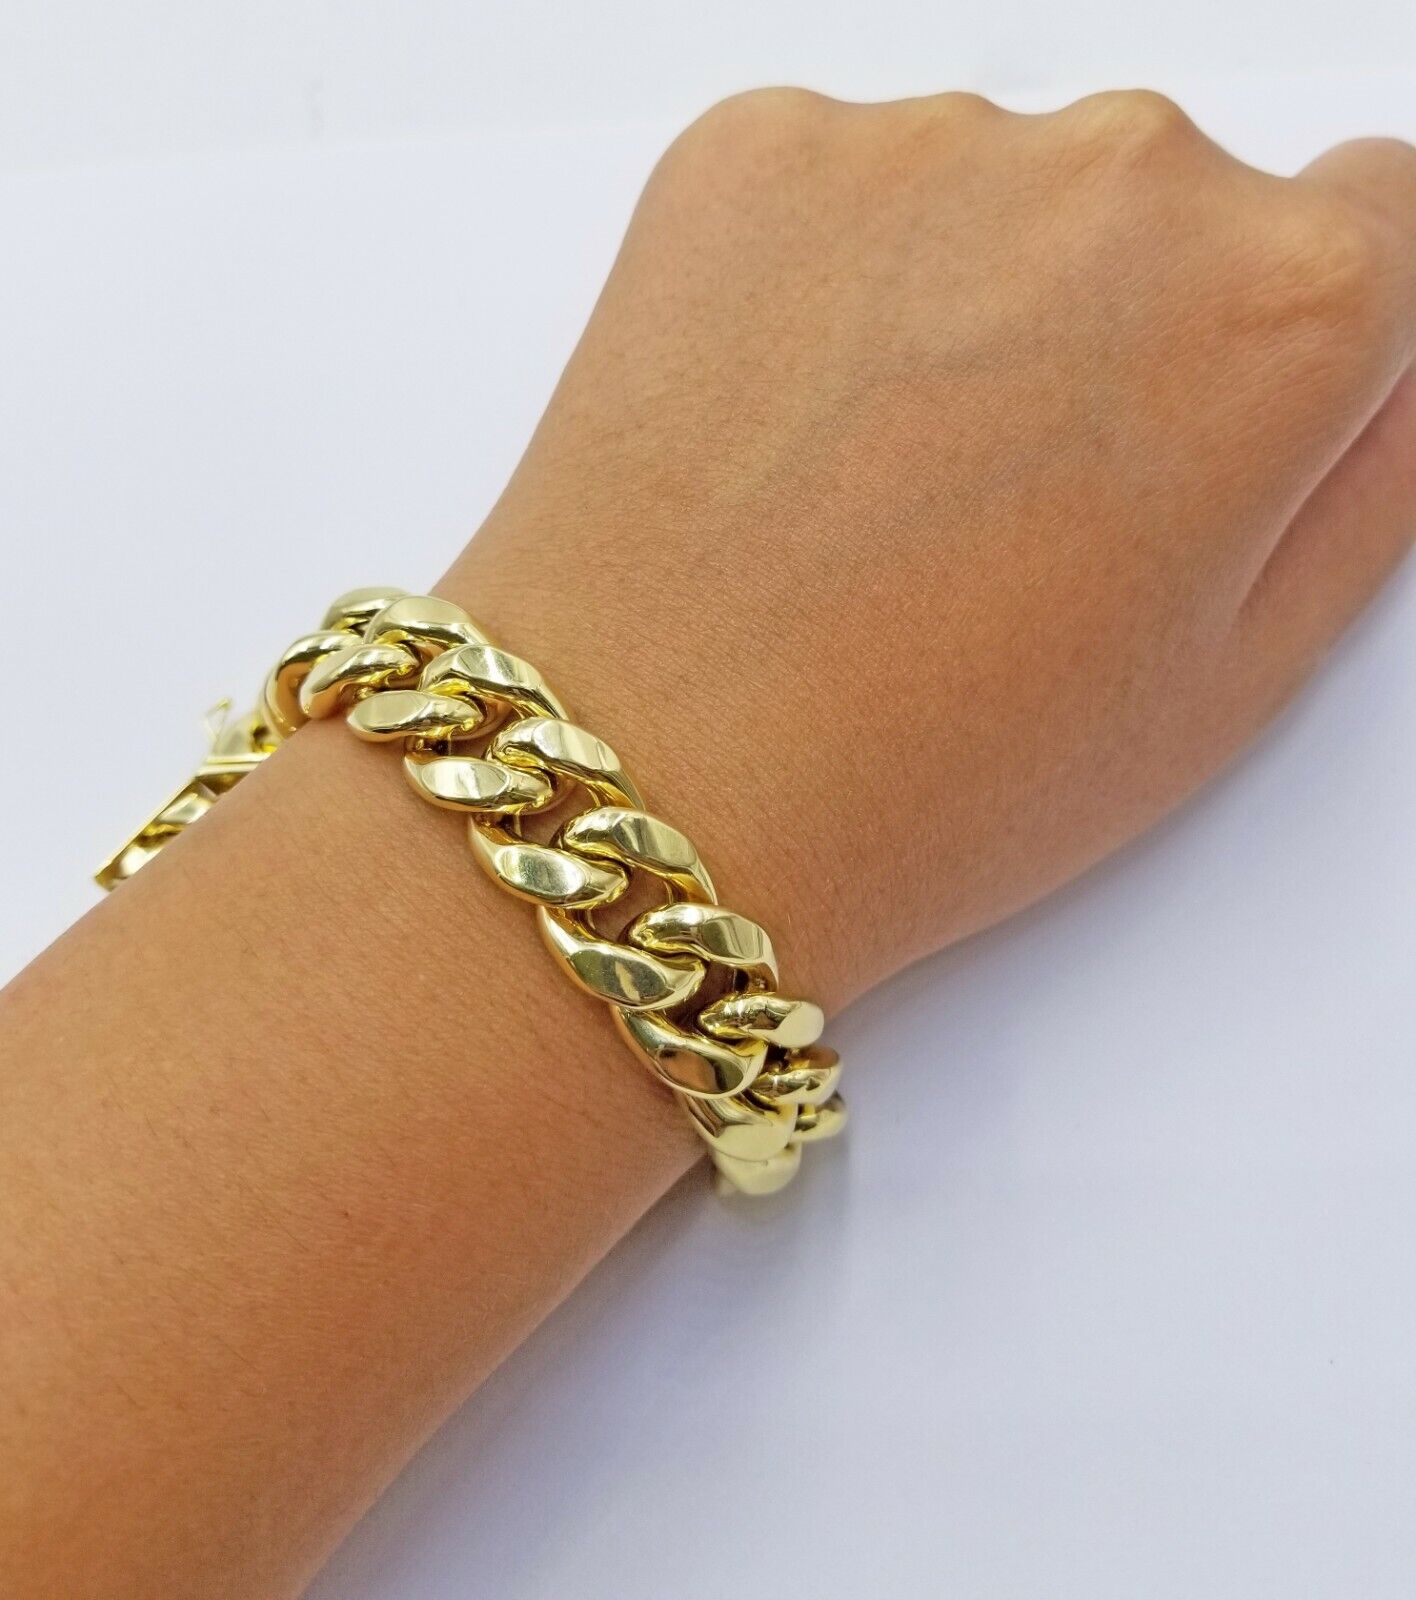 Real 10k Gold Bracelet Miami Cuban Link 8.5 Inch 15mm Box clasp Thick Strong 10k